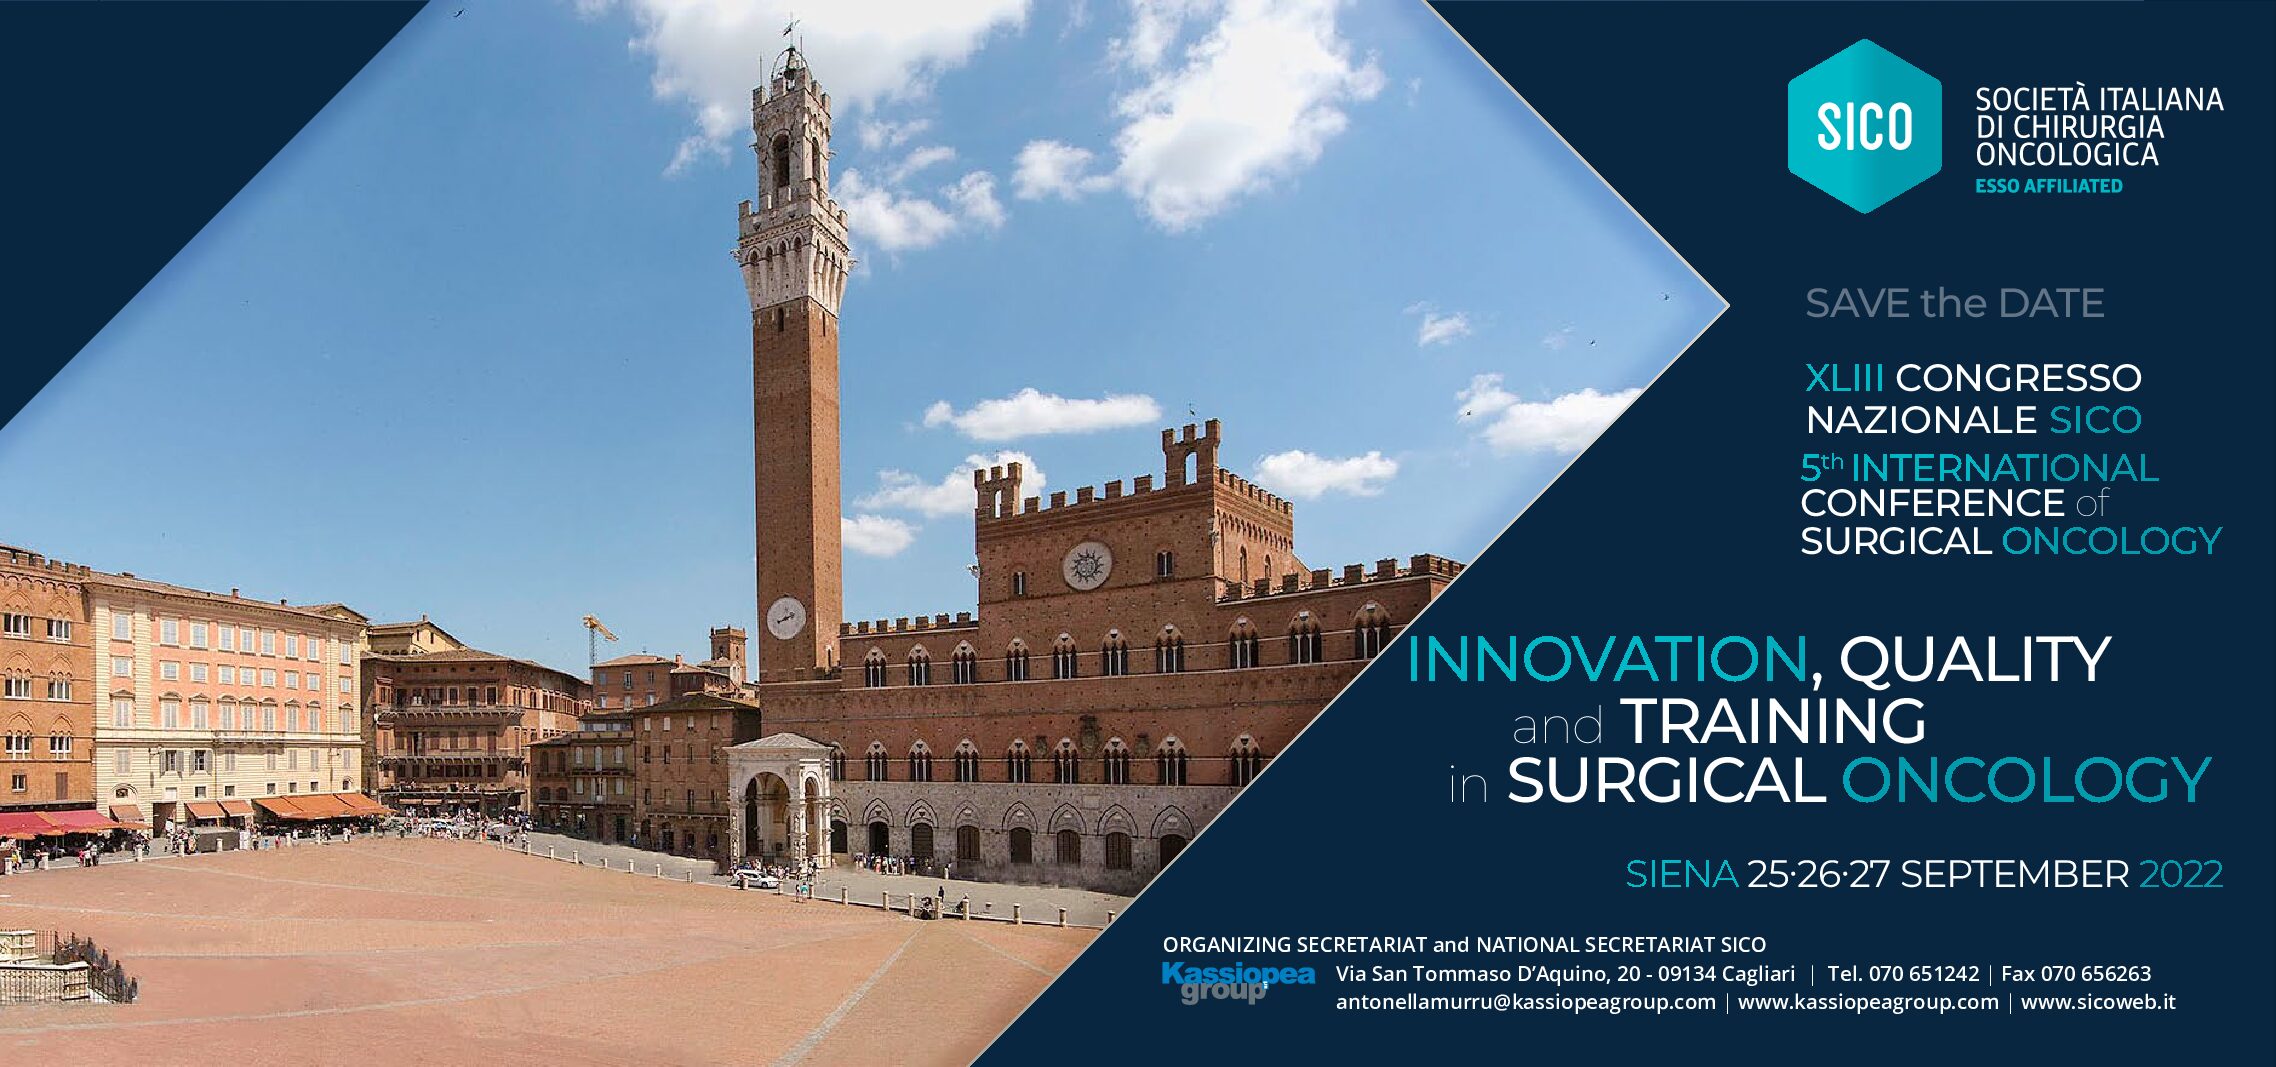 XLIII CONGRESSO NAZIONALE SICO  – 5th INTERNATIONAL CONFERENCE of SURGICAL ONCOLOGY